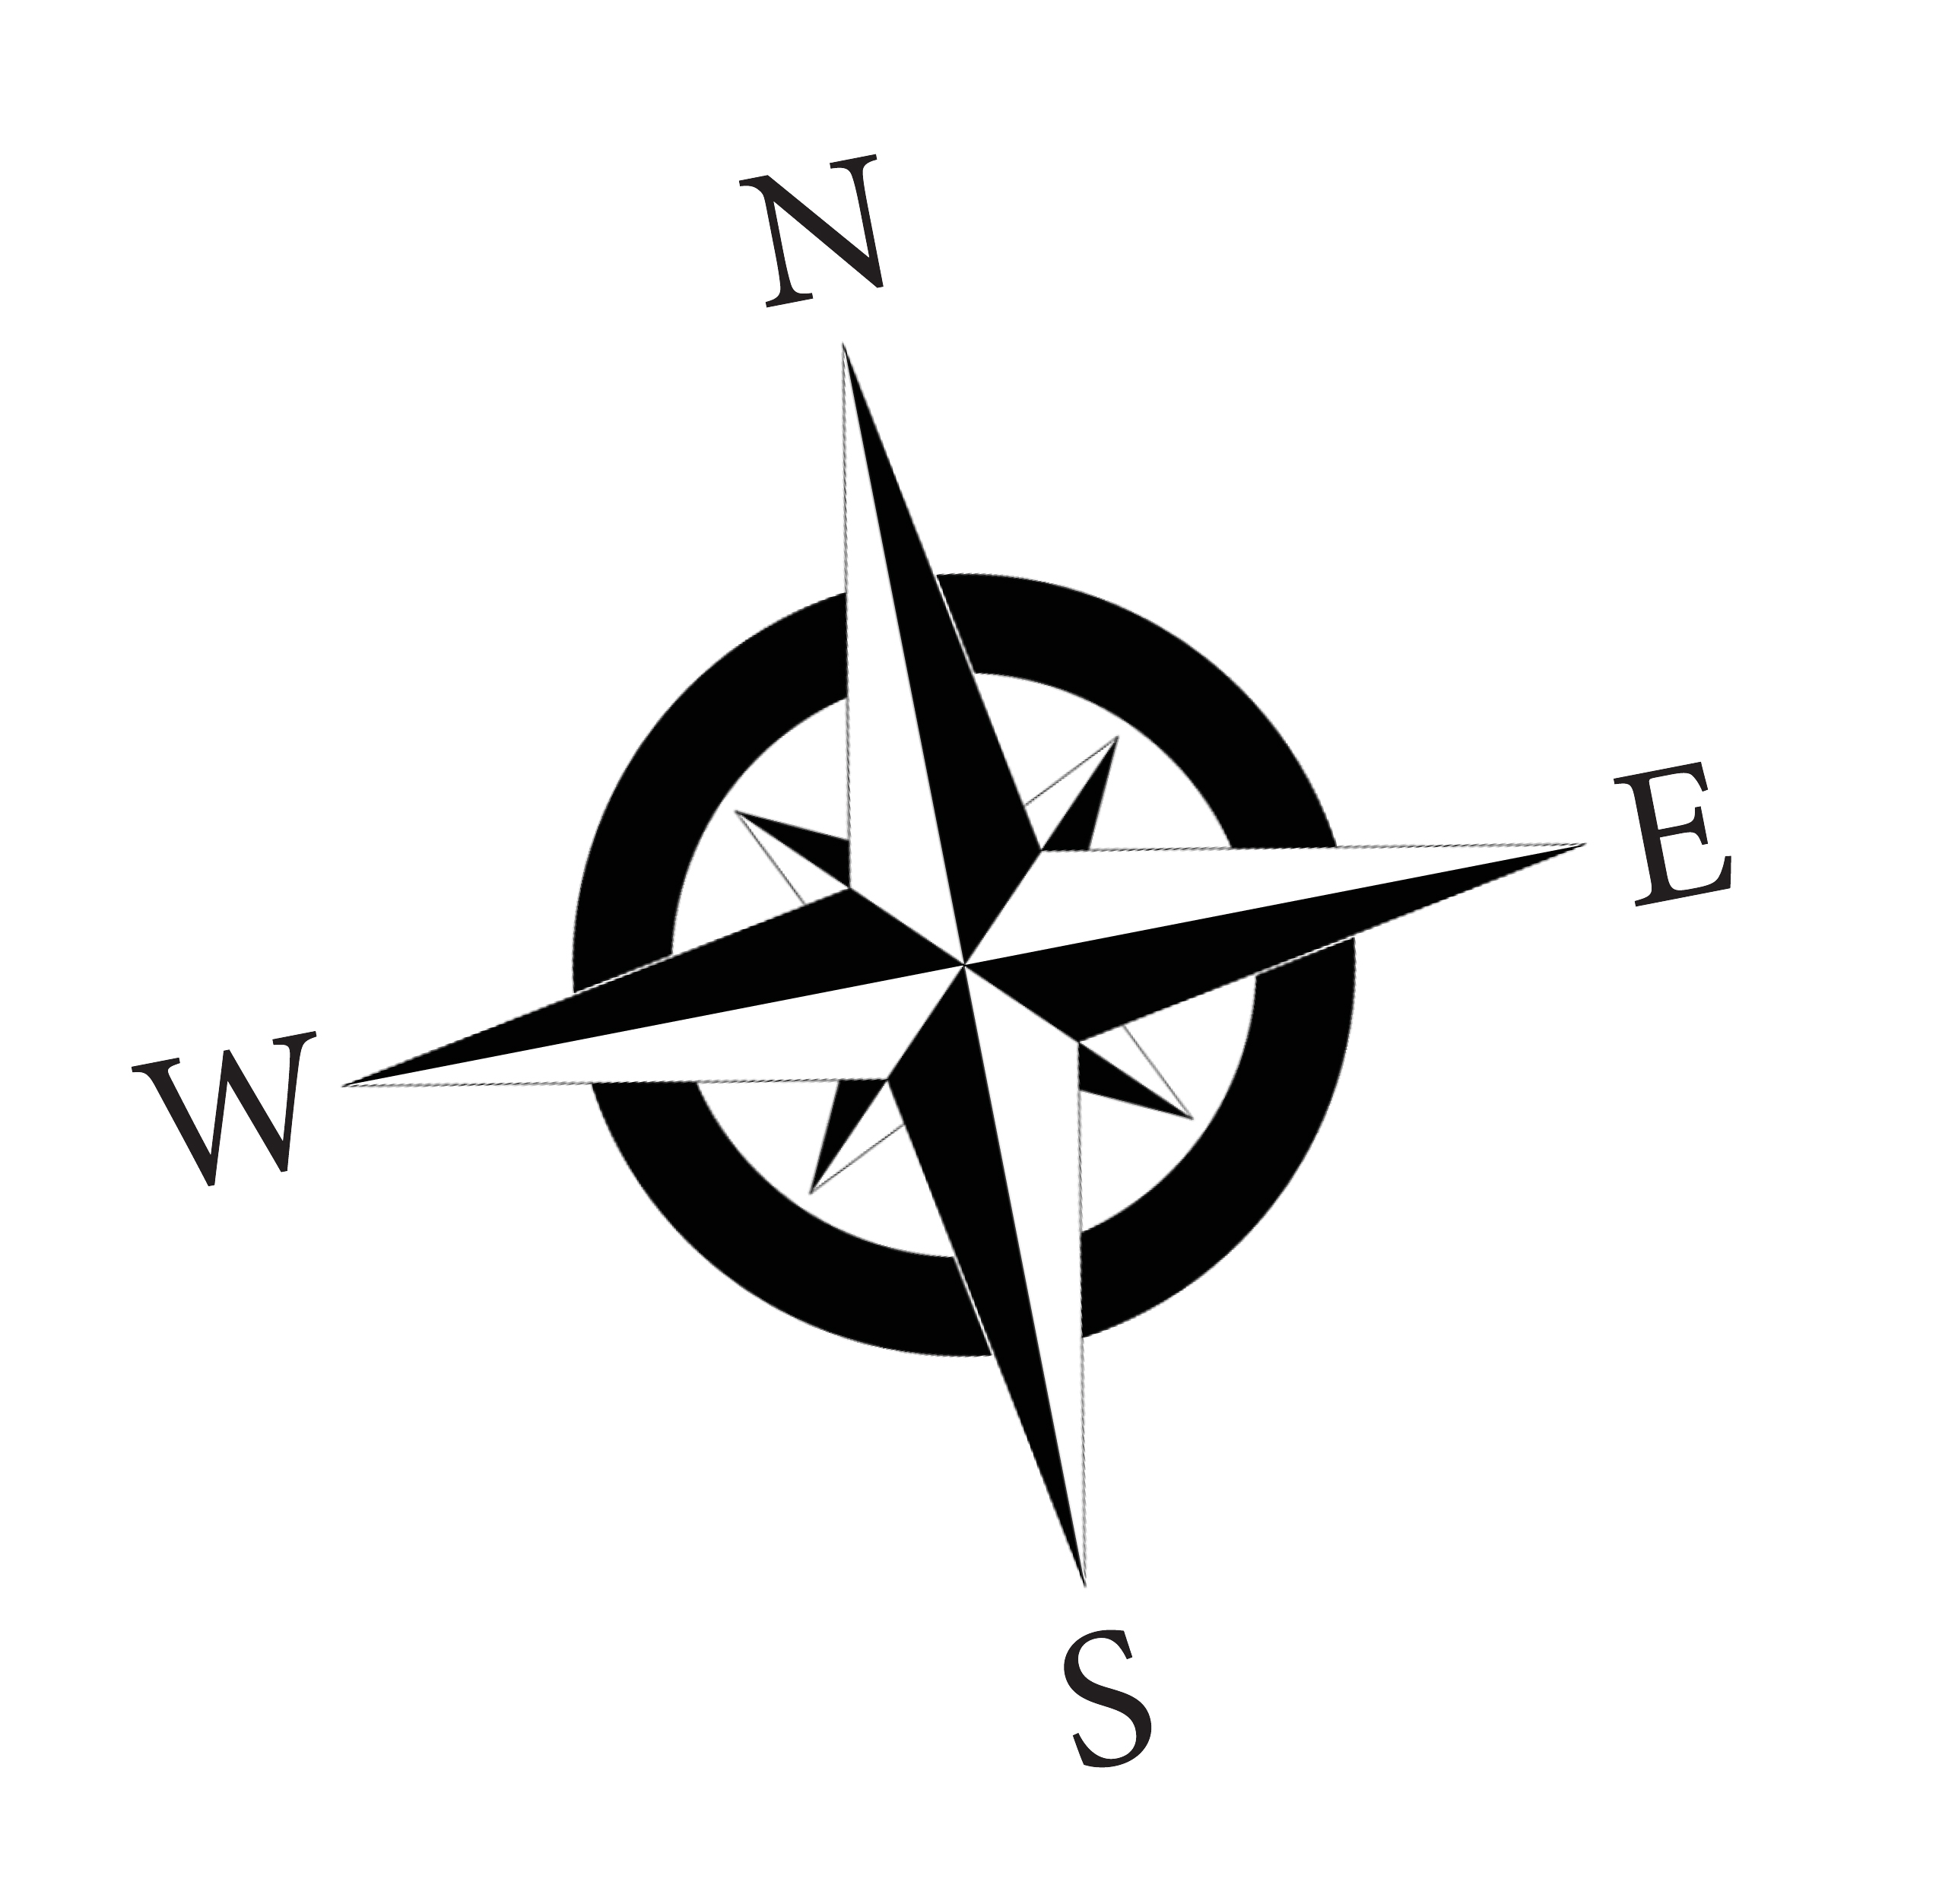 Compass Rose nsew bw.indd